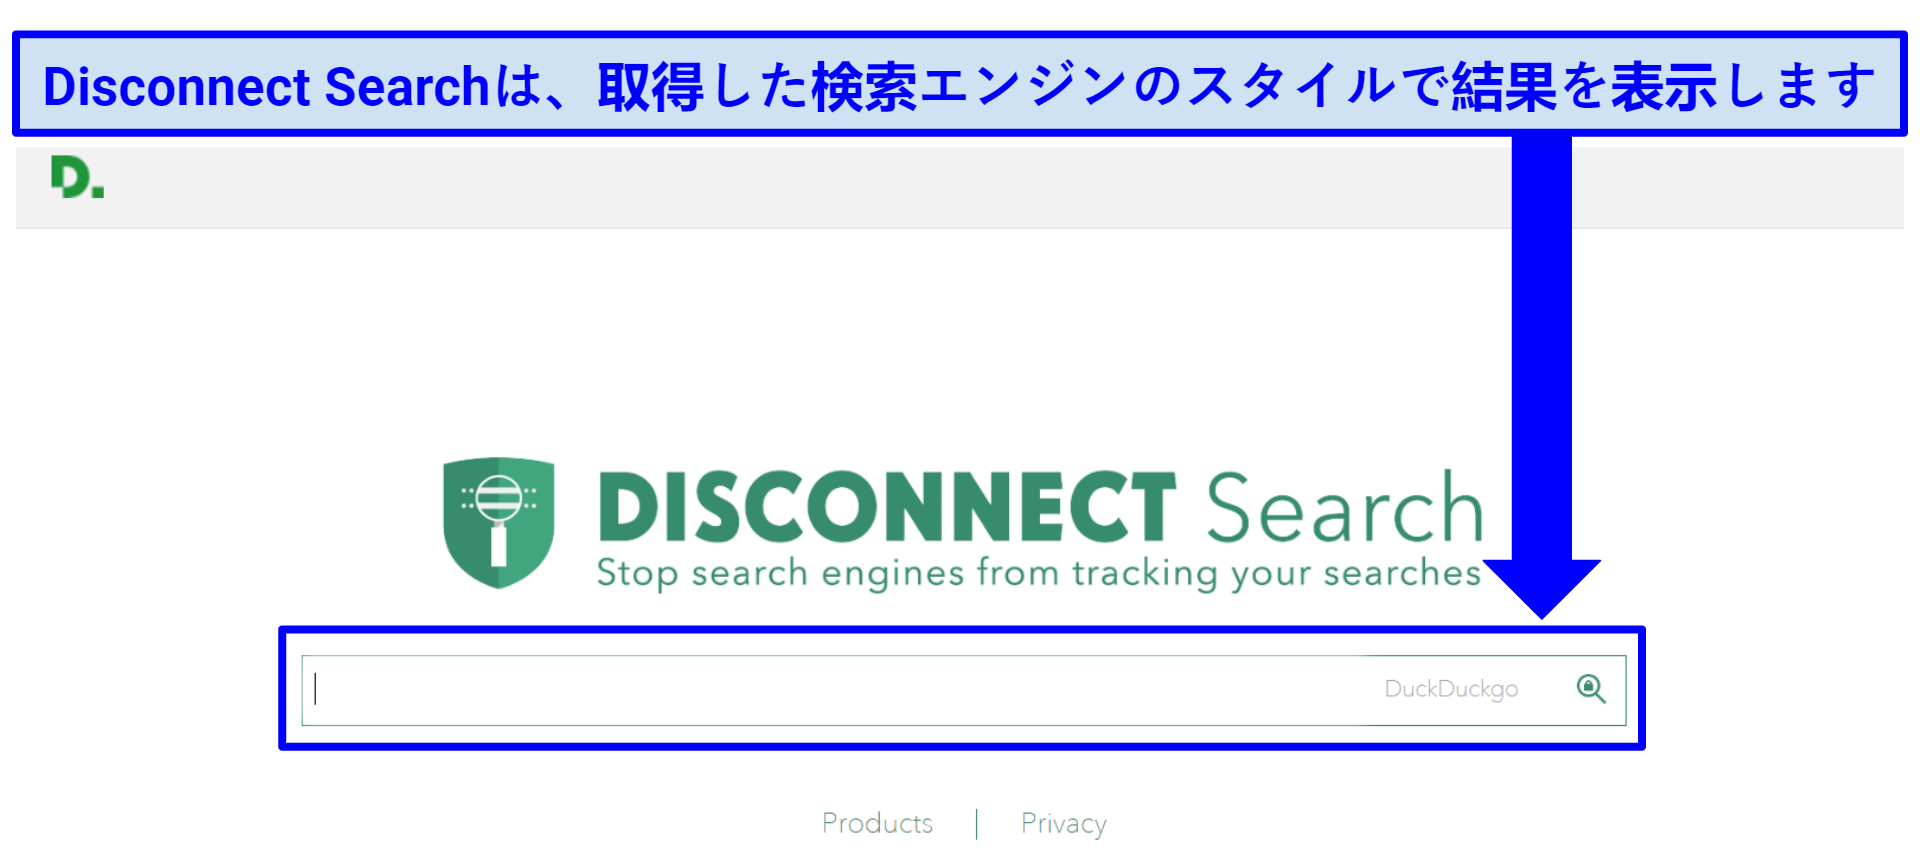 A screenshot showing Disconnect Search's search bar